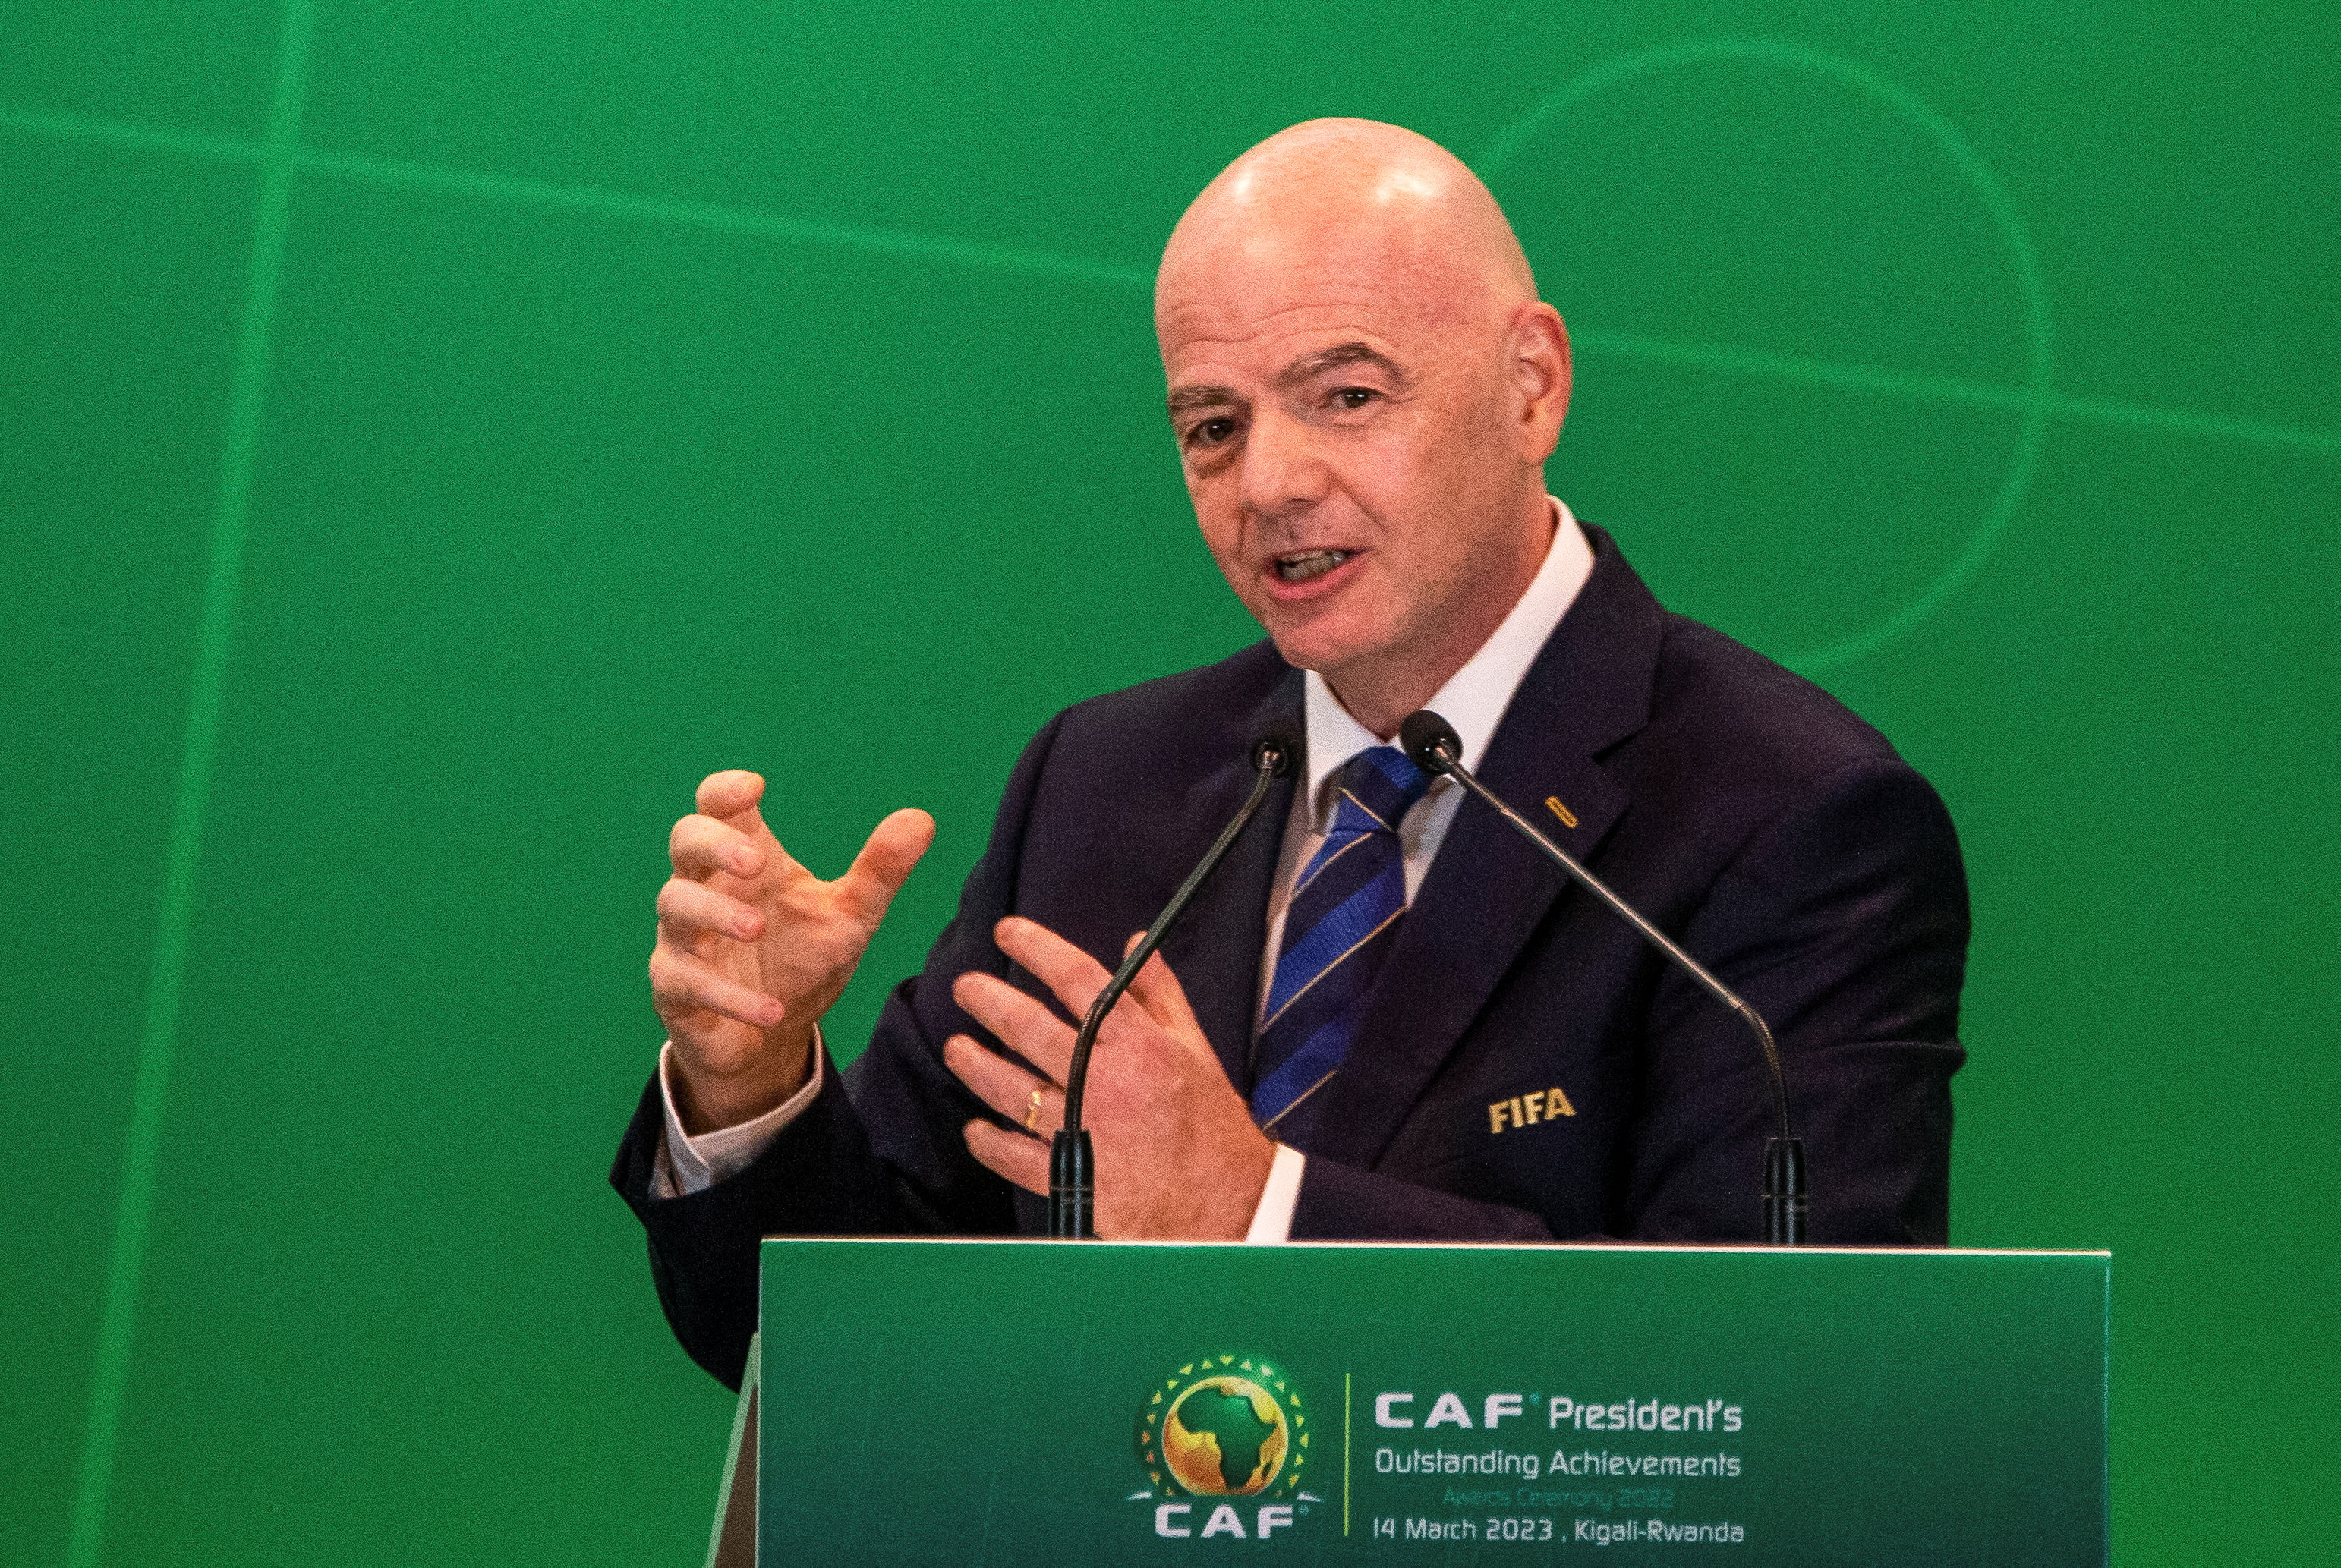 FIFA president Gianni Infantino addresses delegates during the CAF President's Outstanding Achievement Awards, in Kigali